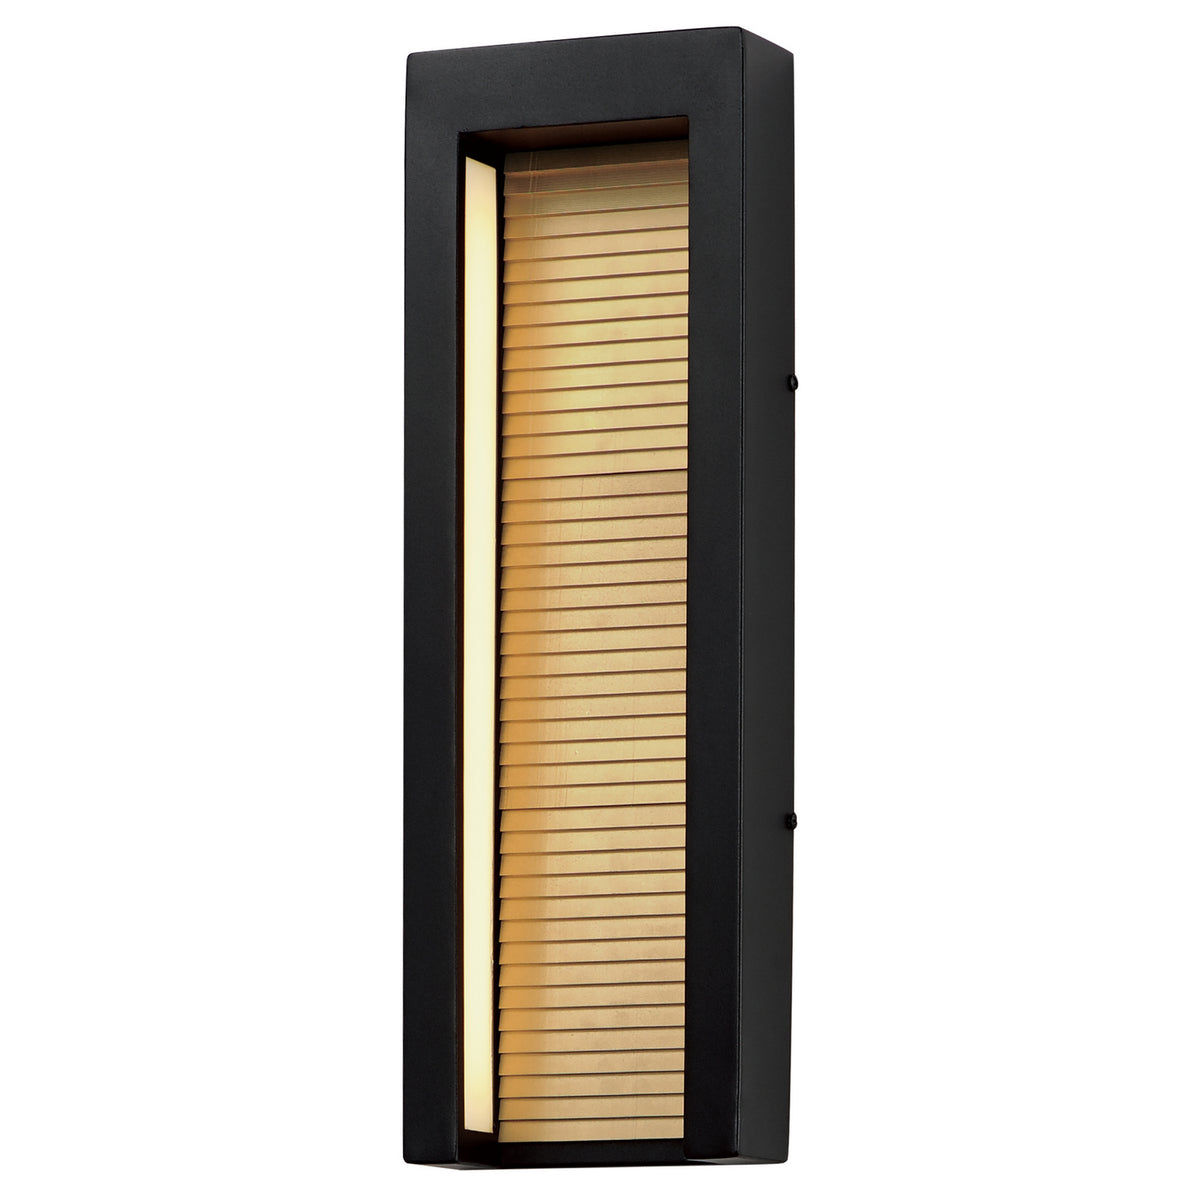 ET2 - E30106-BKGLD - LED Outdoor Wall Sconce - Alcove - Black / Gold